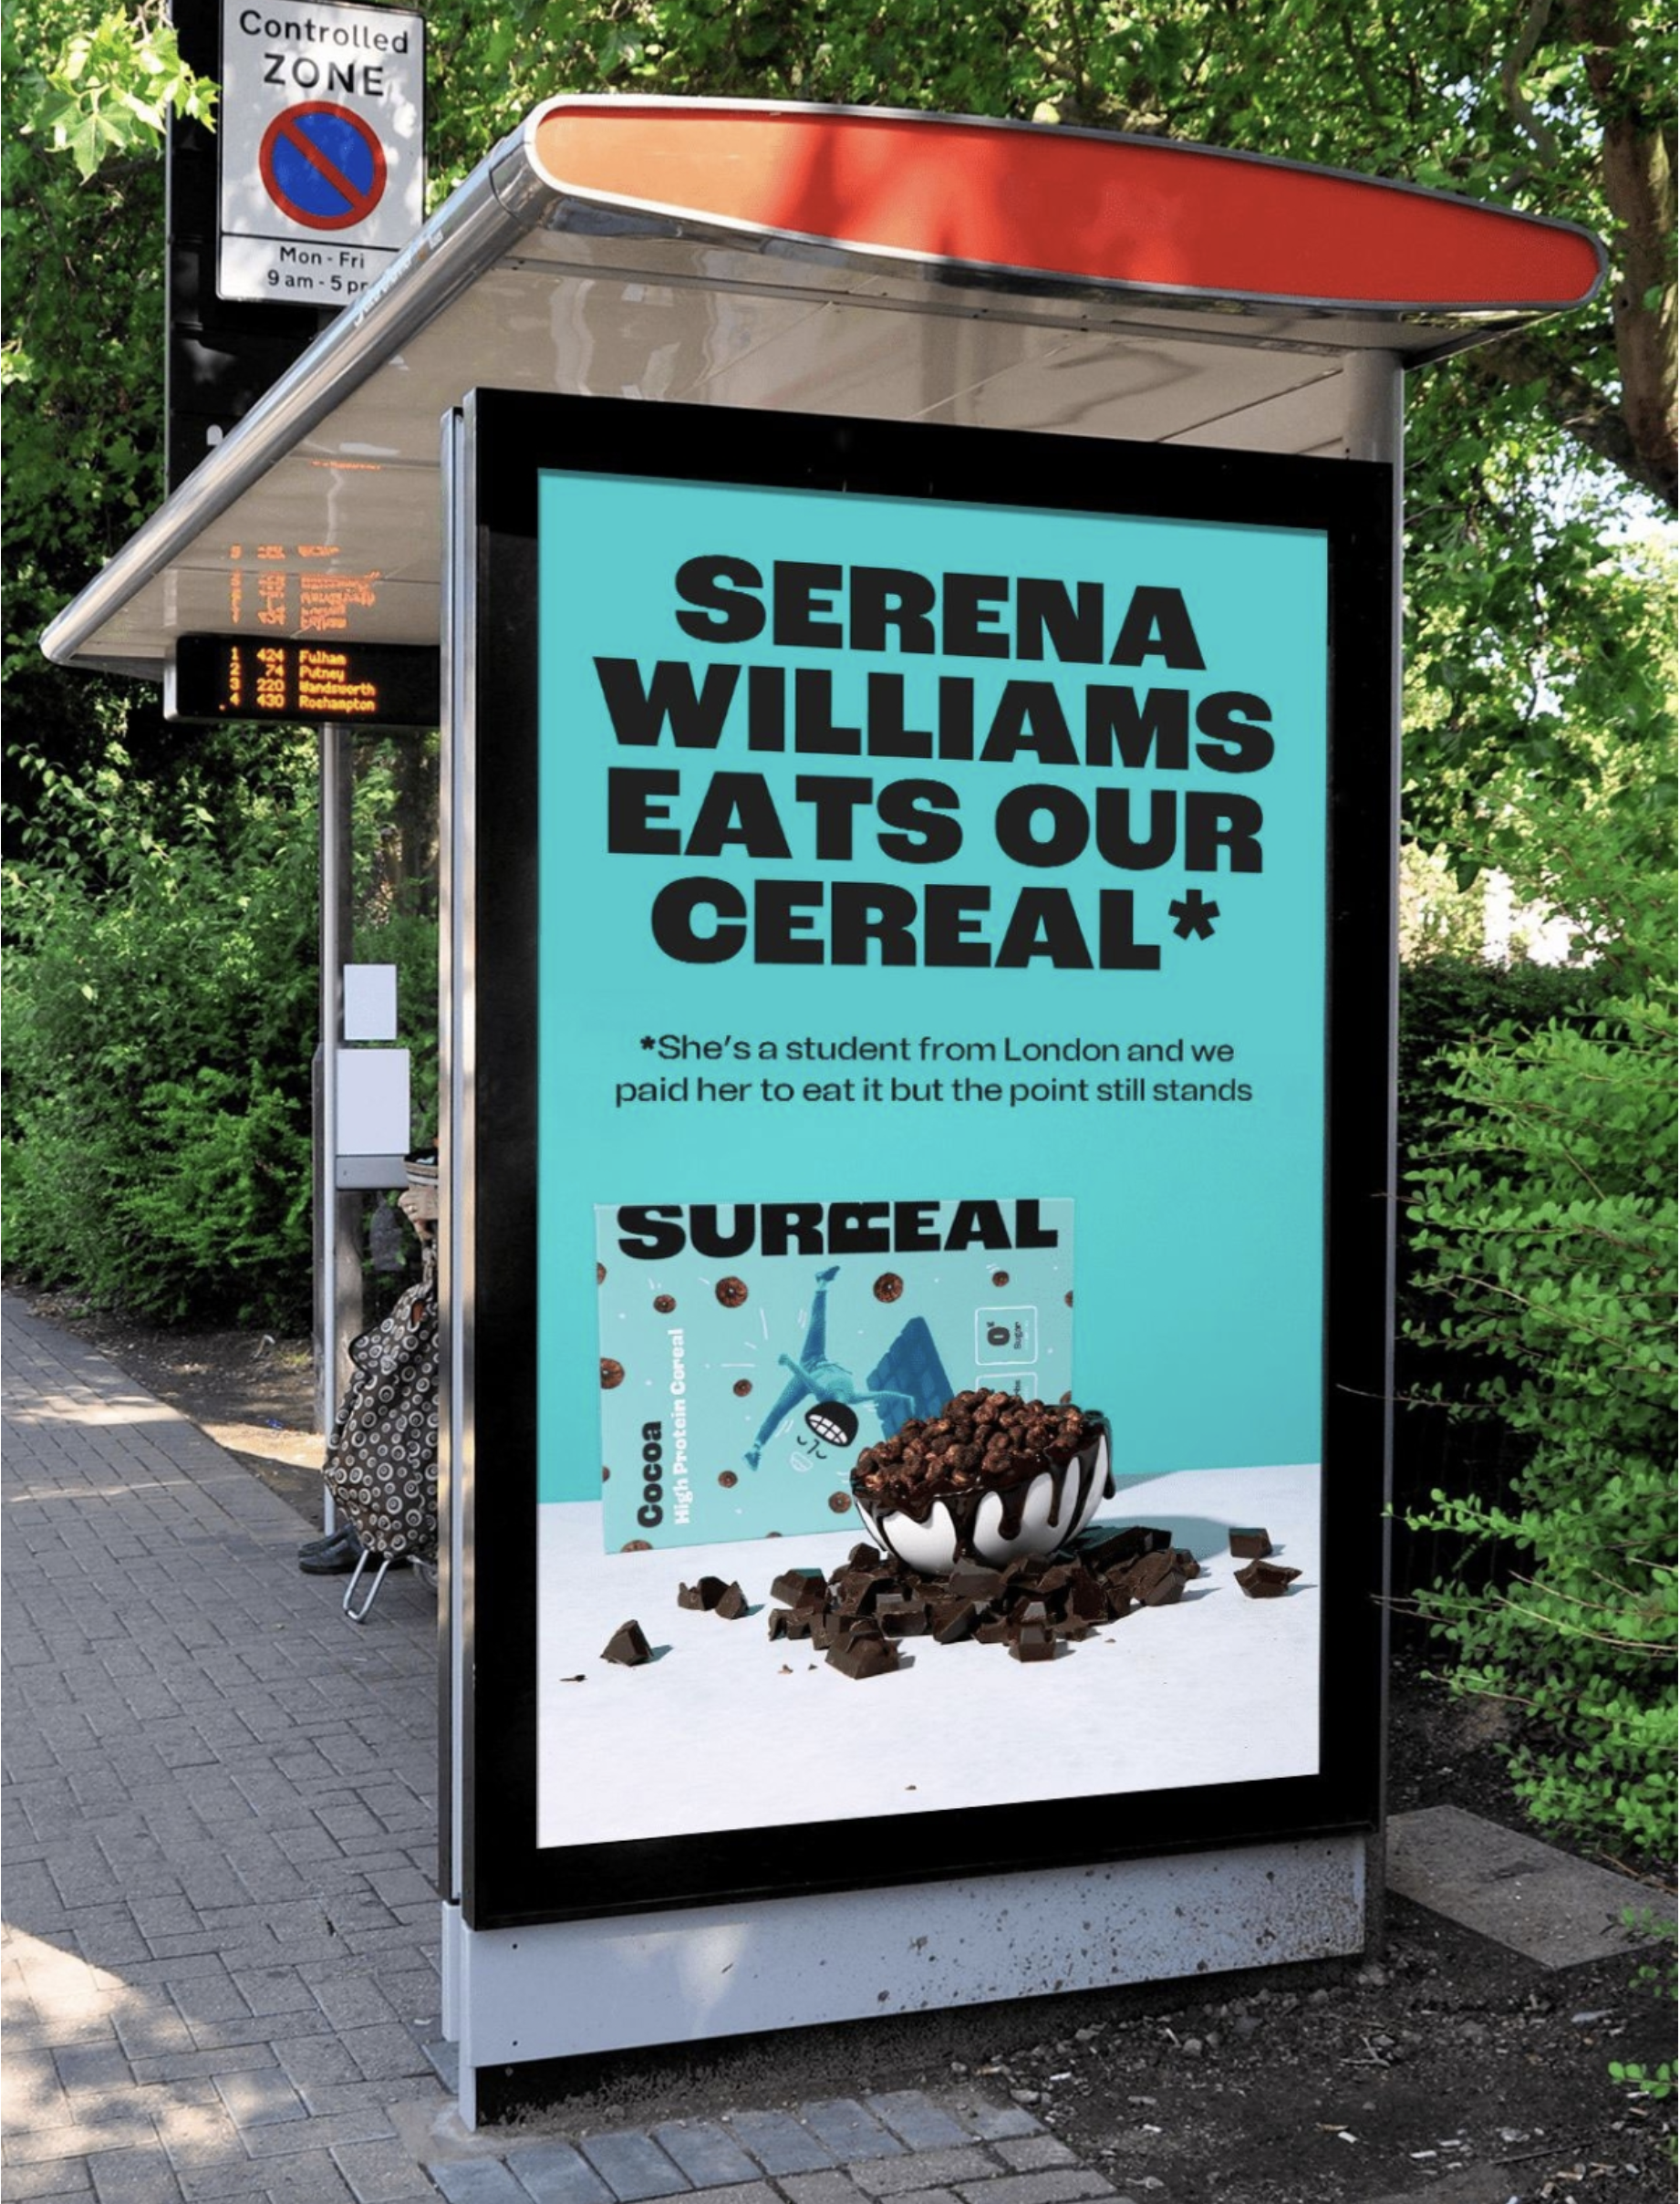 Surreal Cereal Serena Williams billboard - post-controversy version - The Basis Point